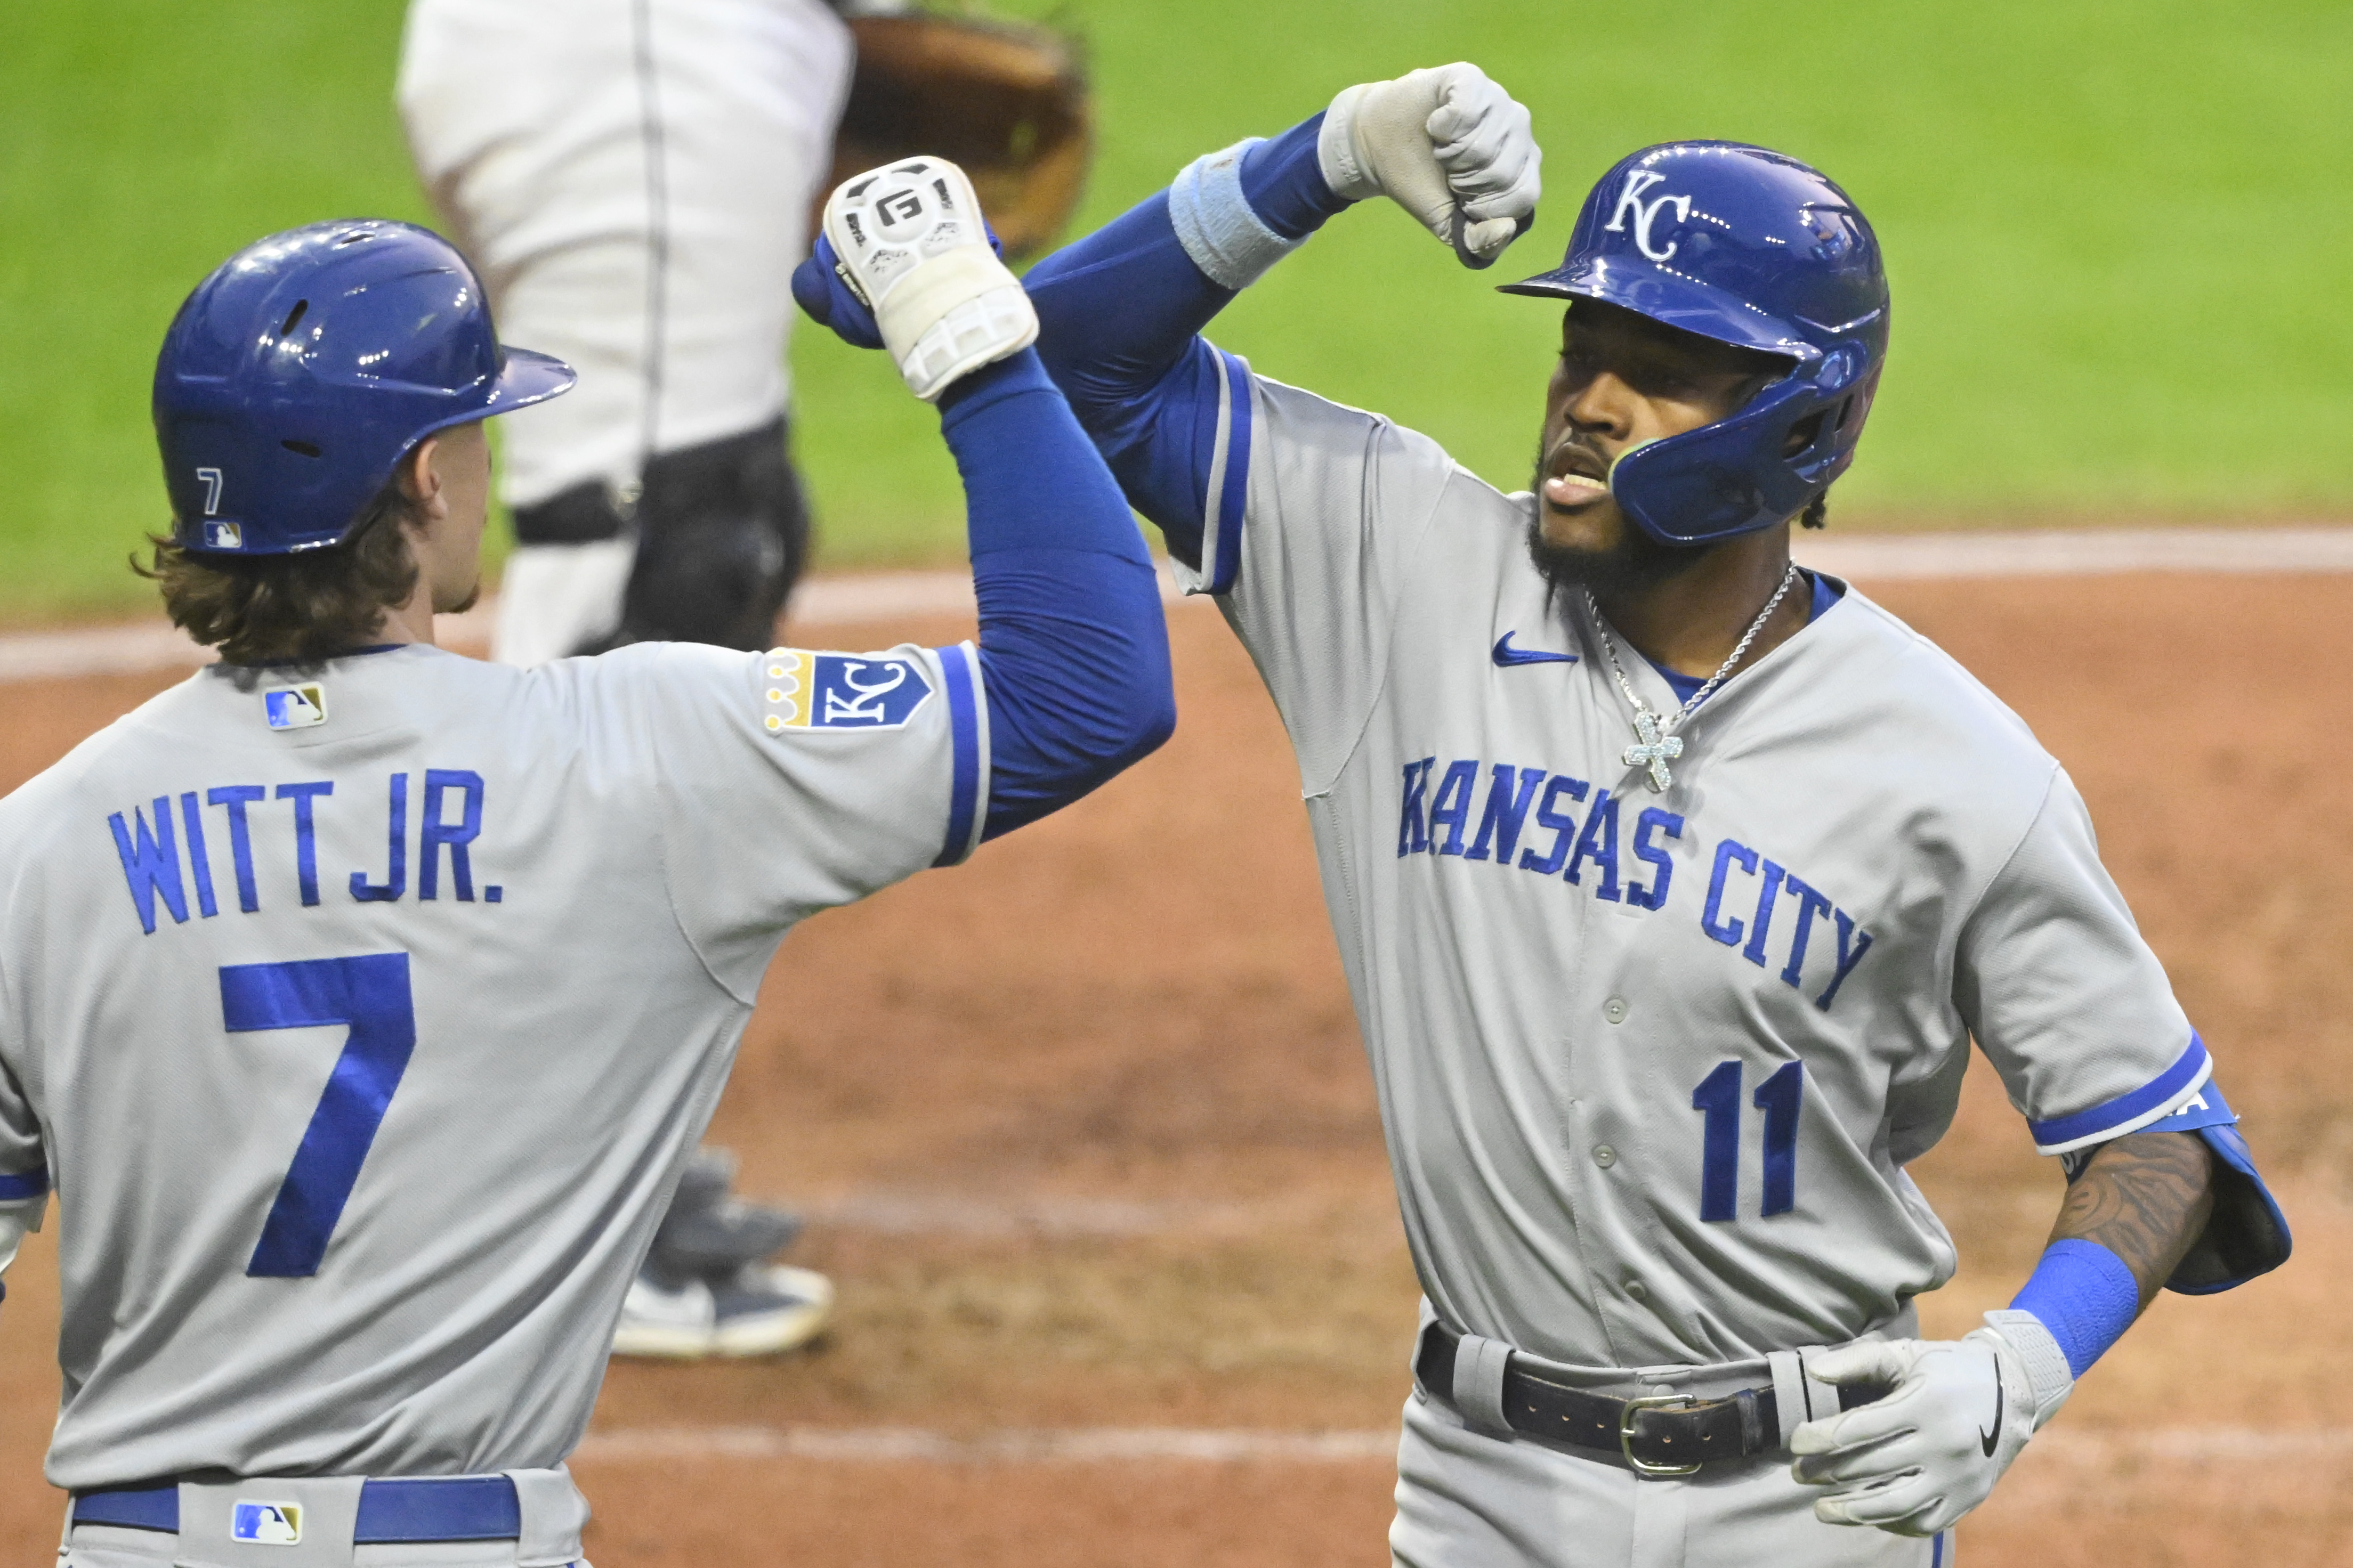 Kansas City Royals third baseman Maikel Garcia (11) celebrates his solo home run with shortstop Bobby Witt Jr. (7) in the seventh inning against the Cleveland Guardians at Progressive Field.